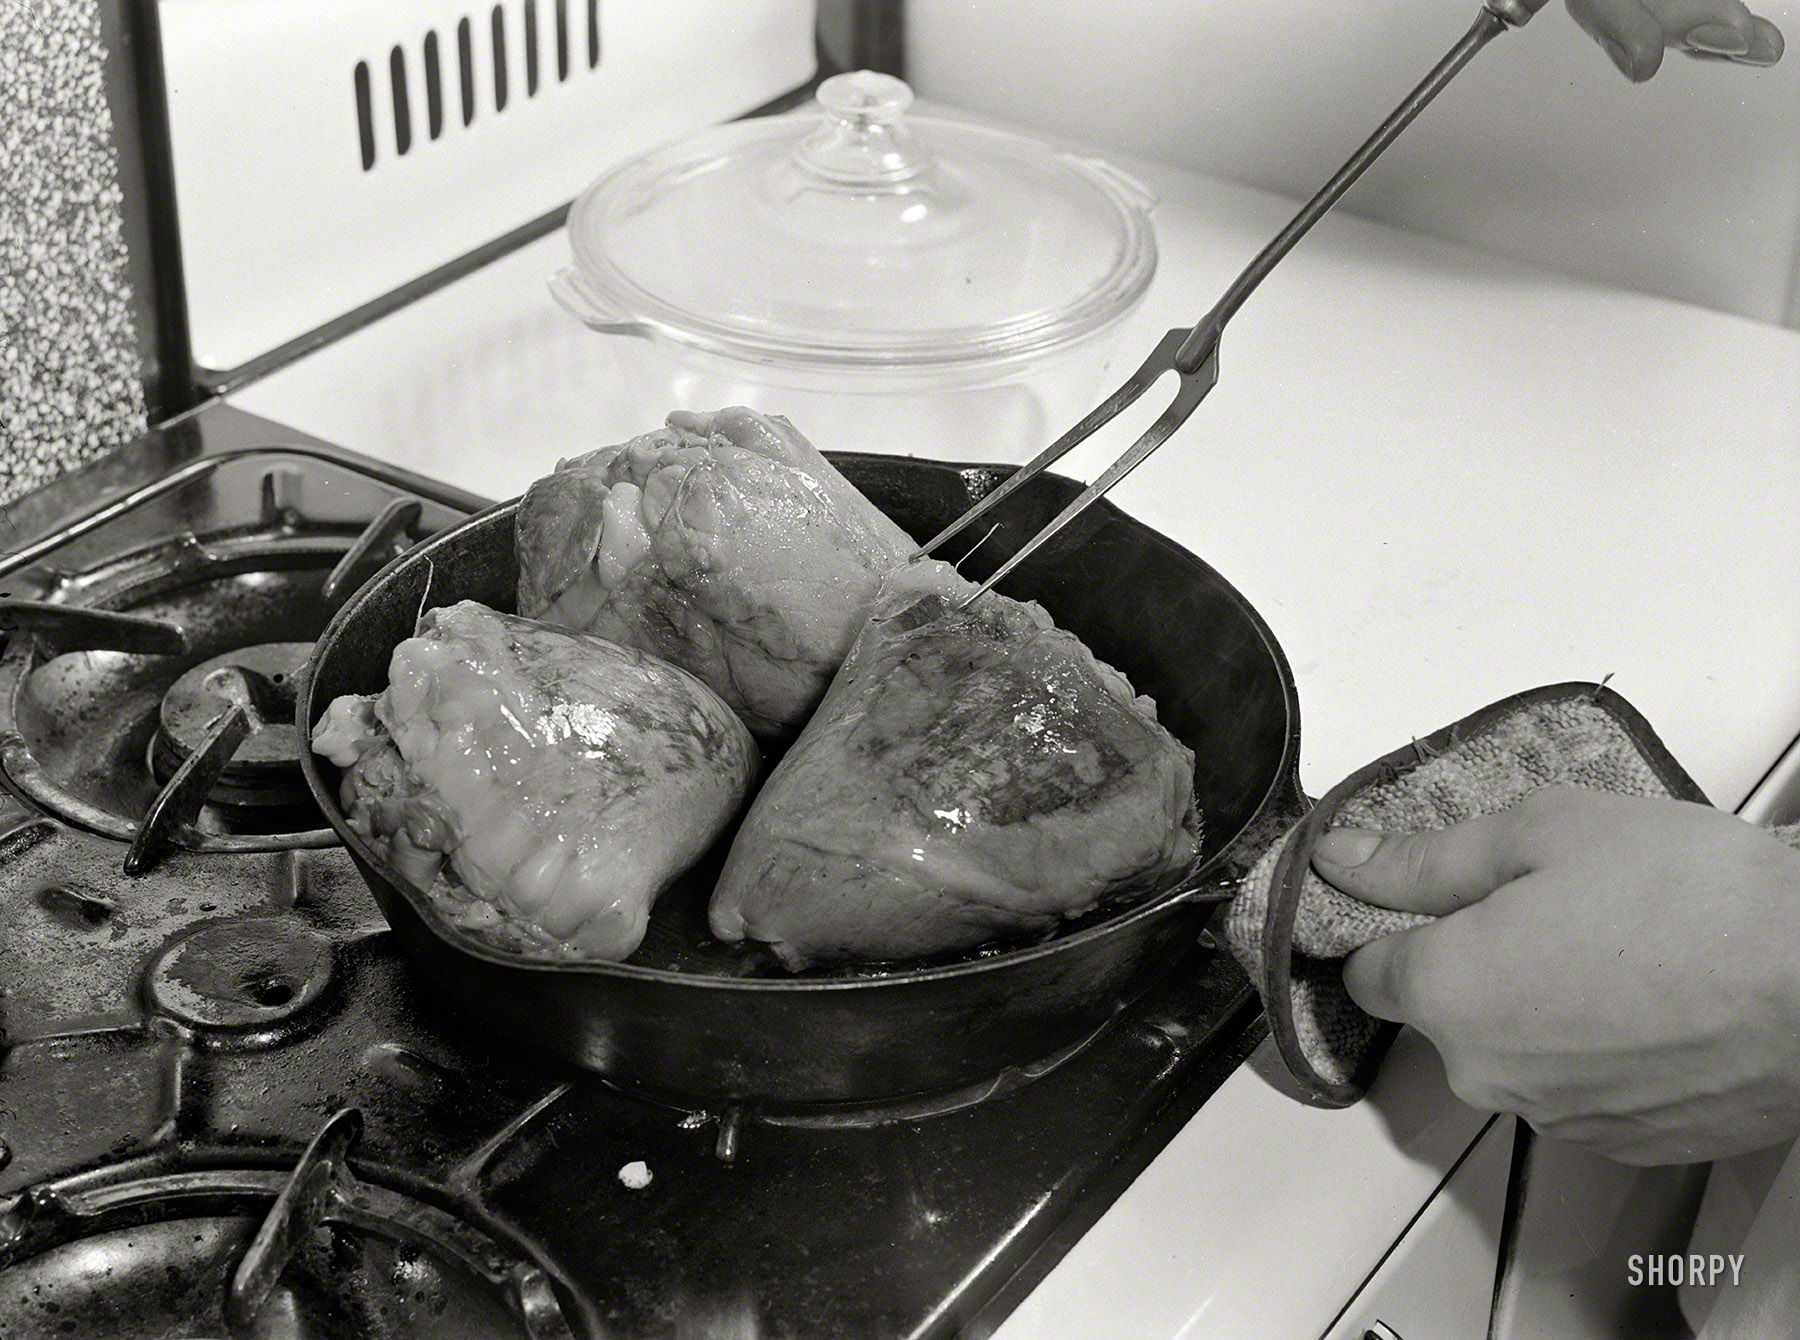 October 1942. "'Share The Meat' recipes. Braised stuffed heart. Brown the hearts on all sides in fat, then place in a covered baking dish or casserole. Add a half of cup of water, cover closely and cook until tender in a very moderate oven (about 300 degrees Fahrenheit). Calf hearts require about one and a half hours, beef hearts will require much longer -- four to five hours to cook till tender." Photo by Ann Rosener for the Office of War Information. View full size.